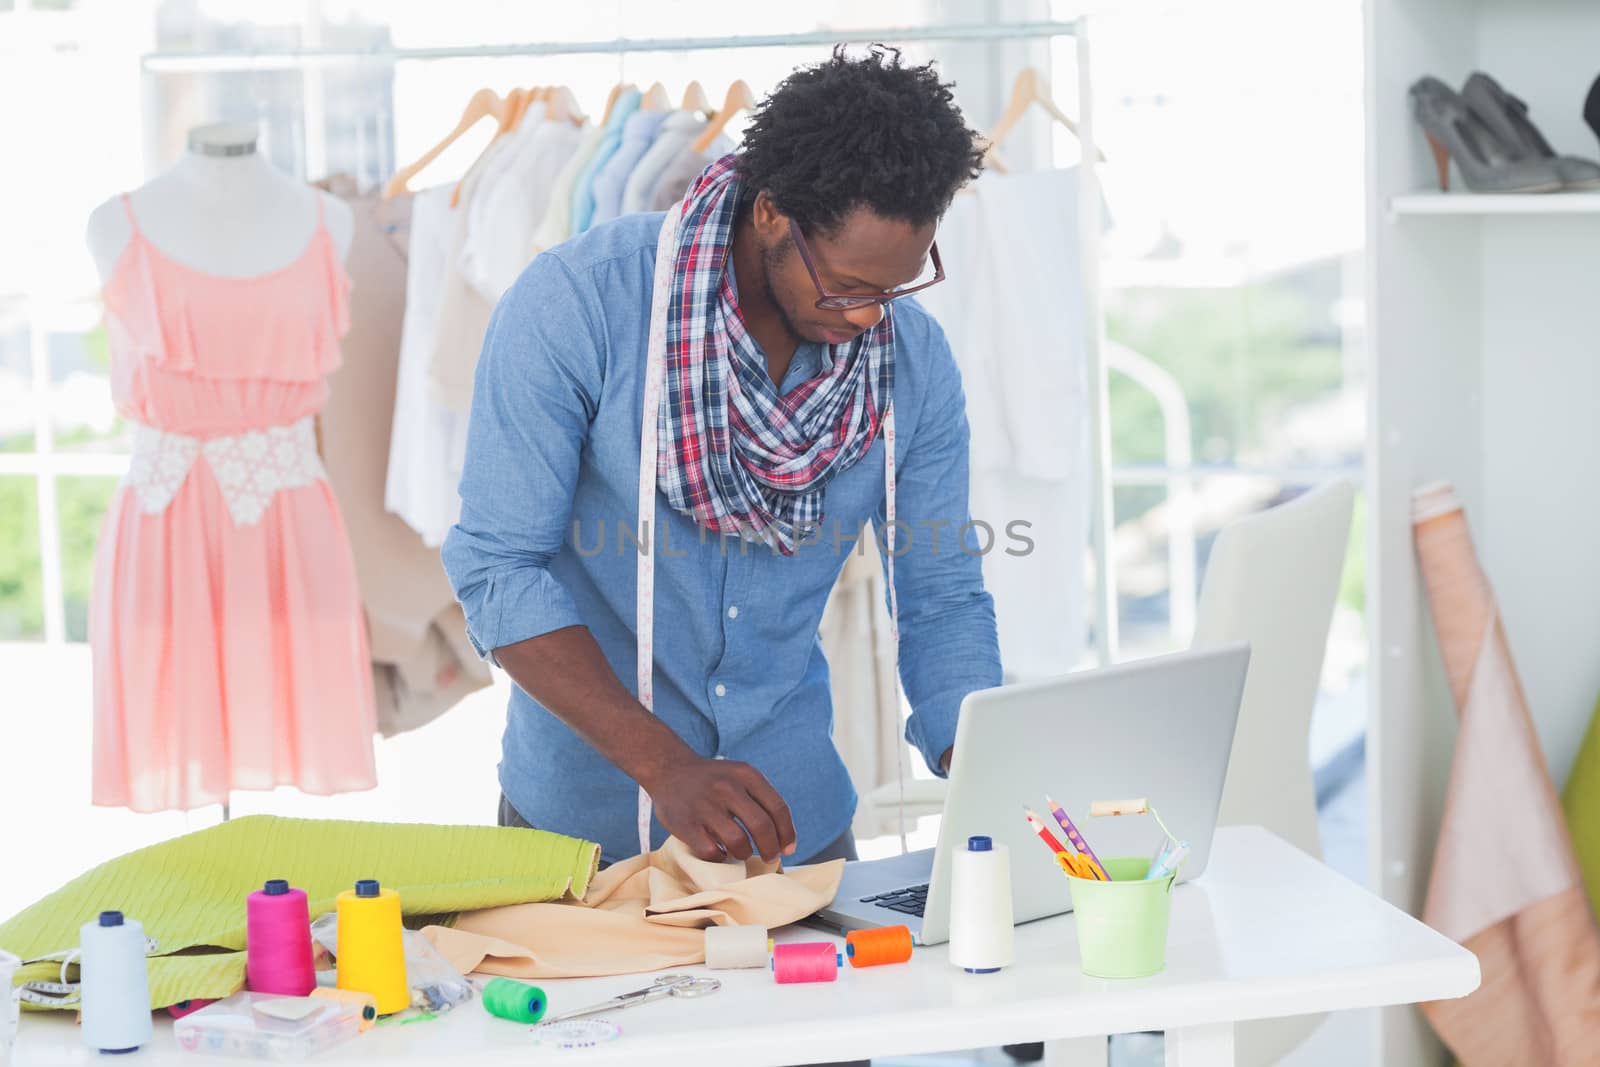 Attractive fashion designer working on laptop in the office